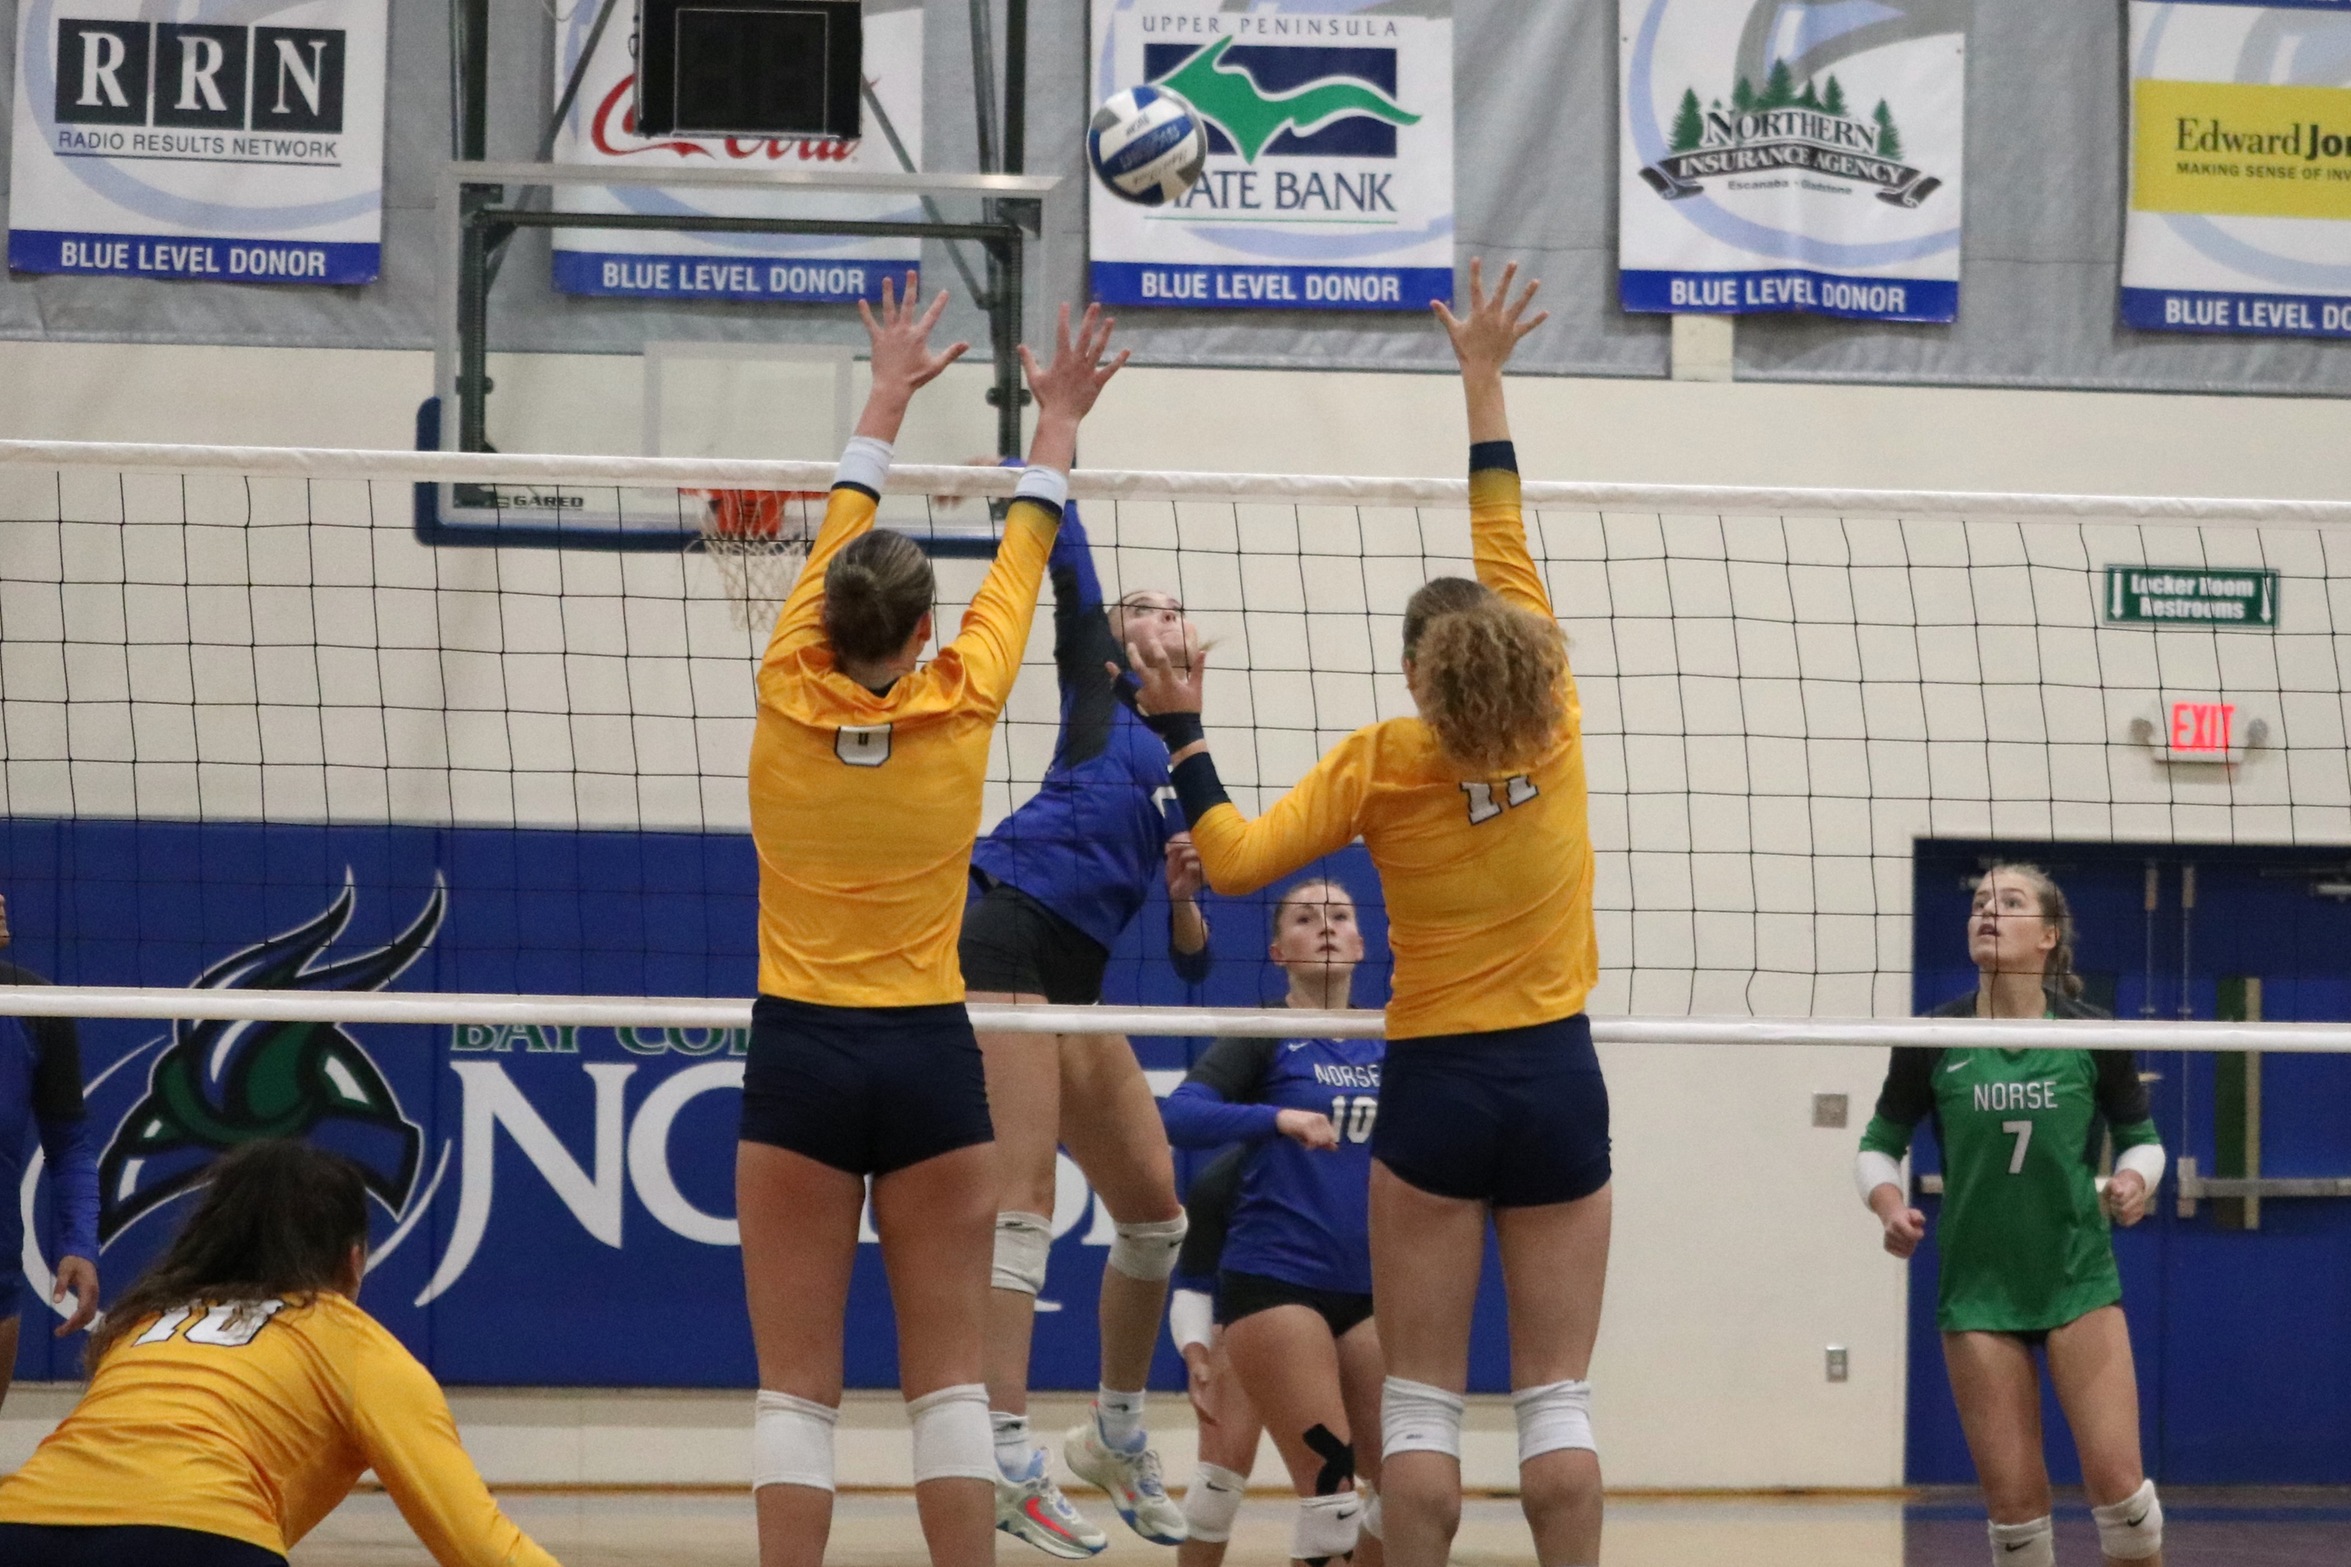 Piper Monroe extends for a kill as two opponents attempt to block